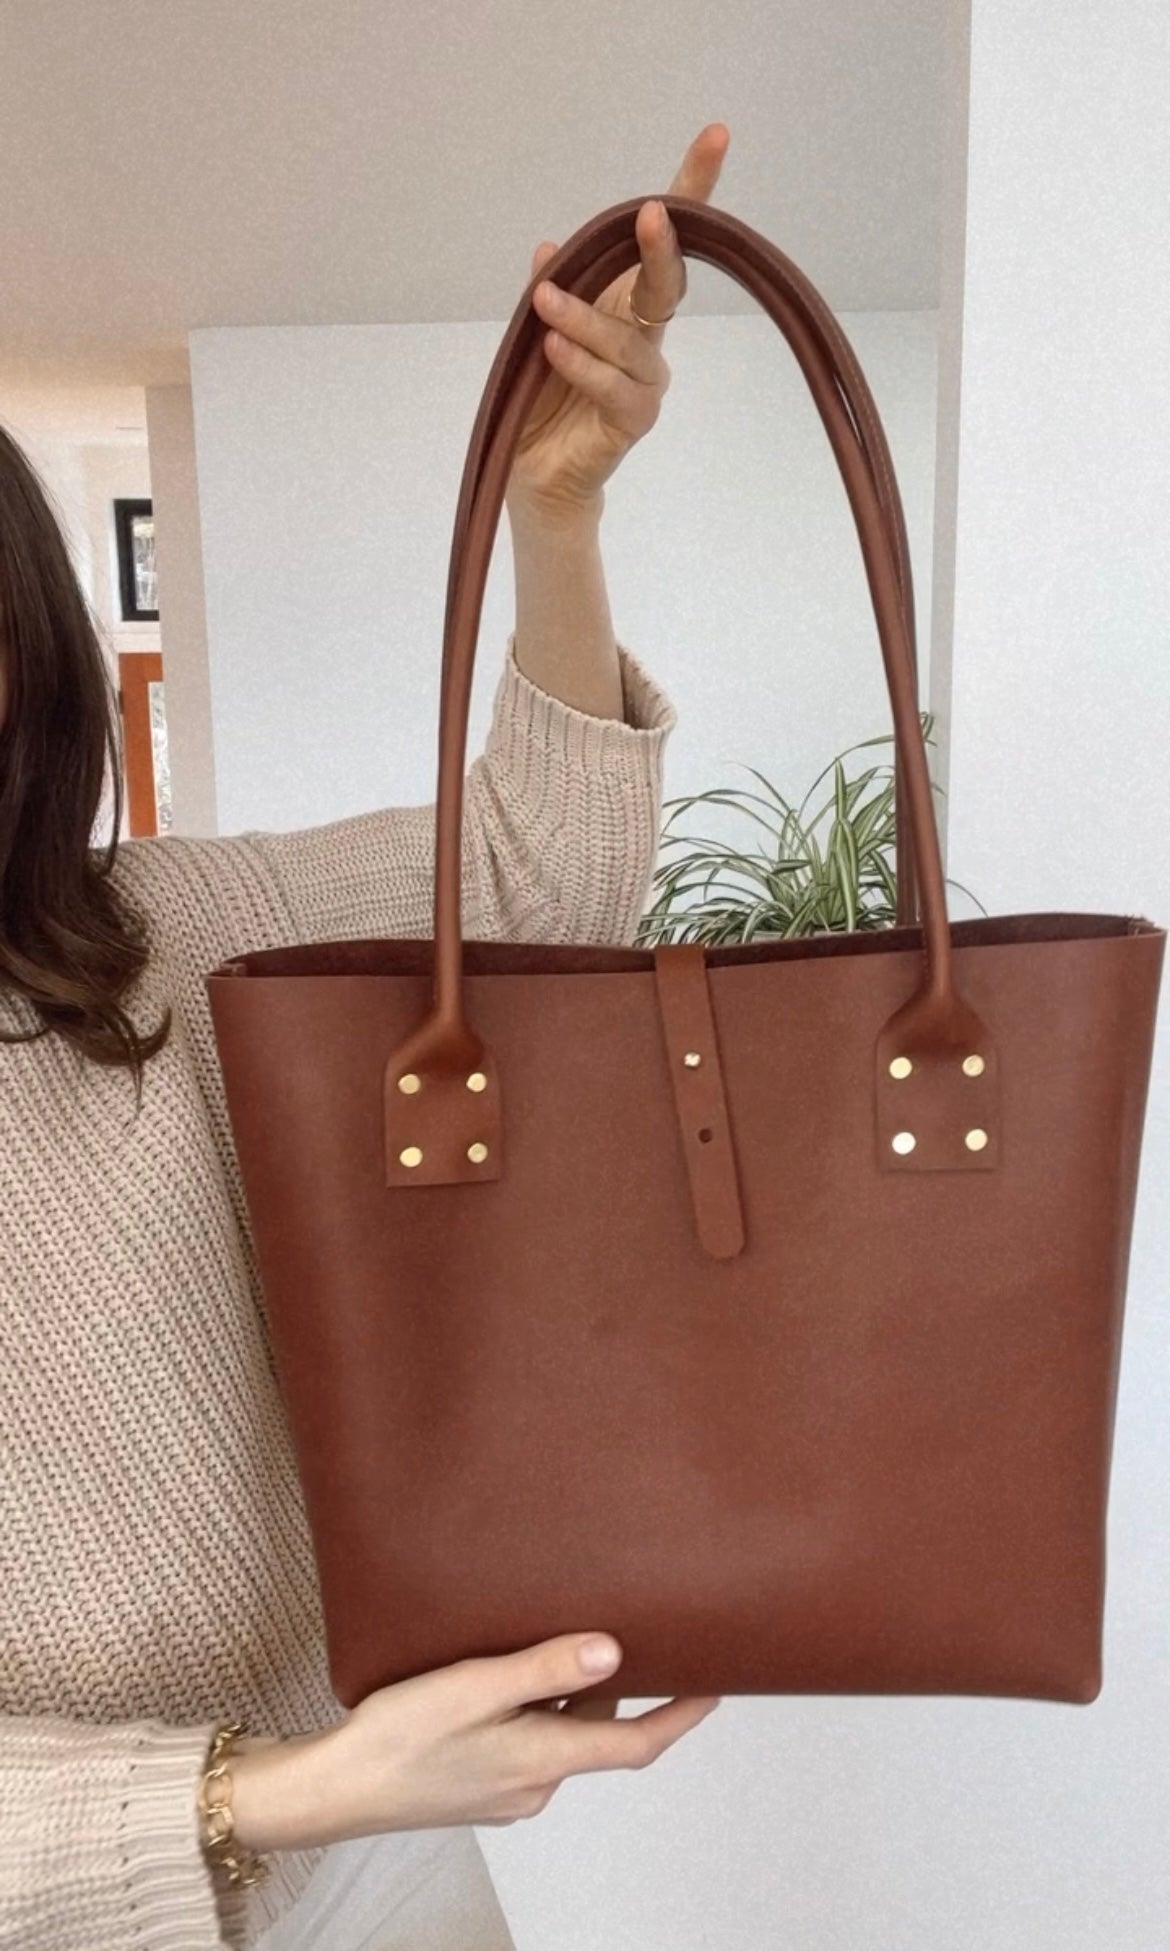 Refined Tote in Brown Leather Bag - handcrafted by Market Canvas Leather in Tofino, BC, Canada